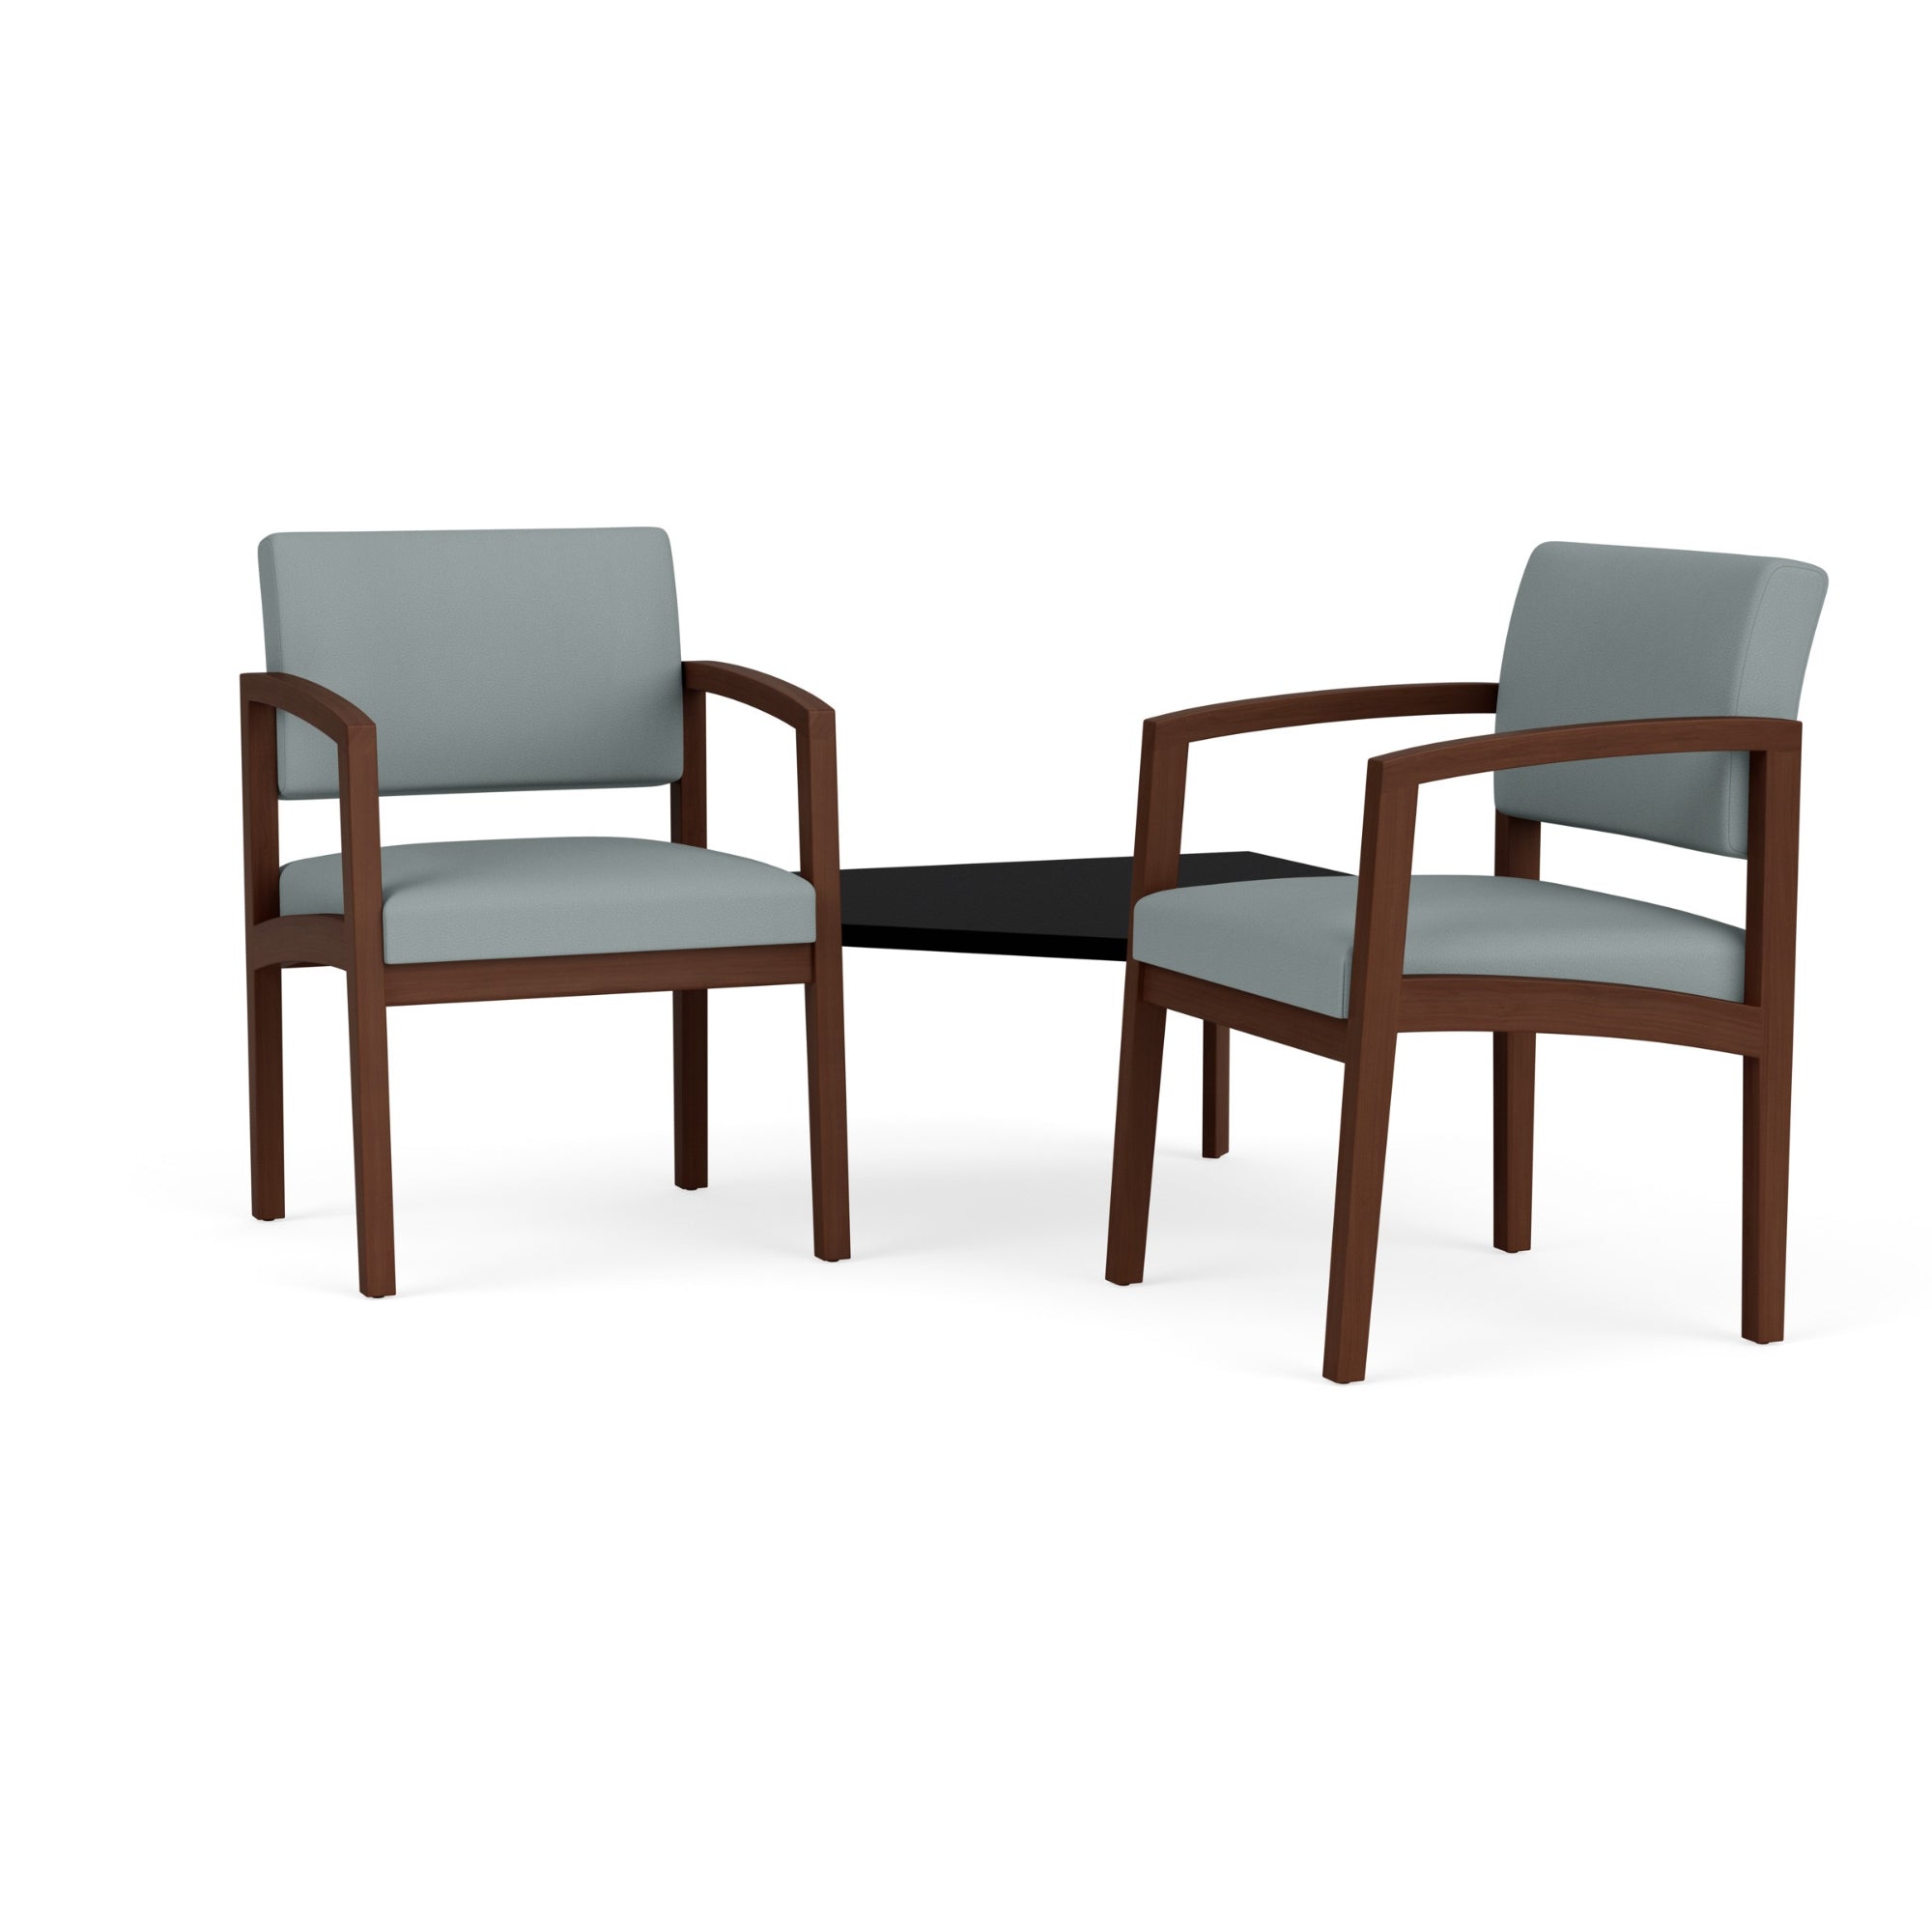 Lenox Wood Collection Reception Seating, 2 Chairs with Black Laminate Connecting Corner Table, Standard Vinyl Upholstery, FREE SHIPPING